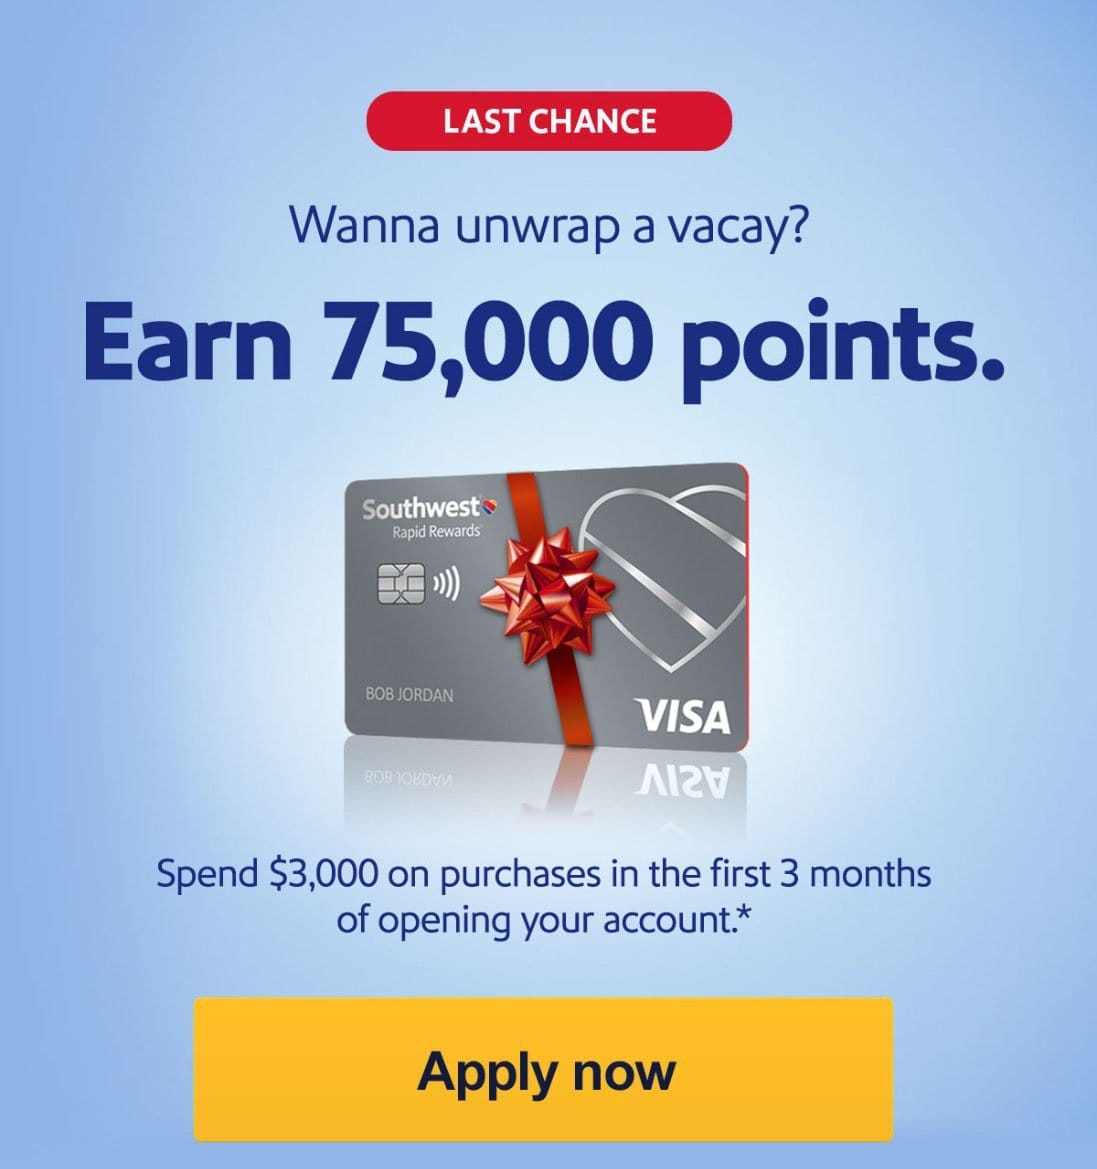 LAST CHANCE. Wanna unwrap a vacay? Earn 75,000 points. Spend \\$3,000 on purchases in the first 3 months of opening your account* [Apply now]